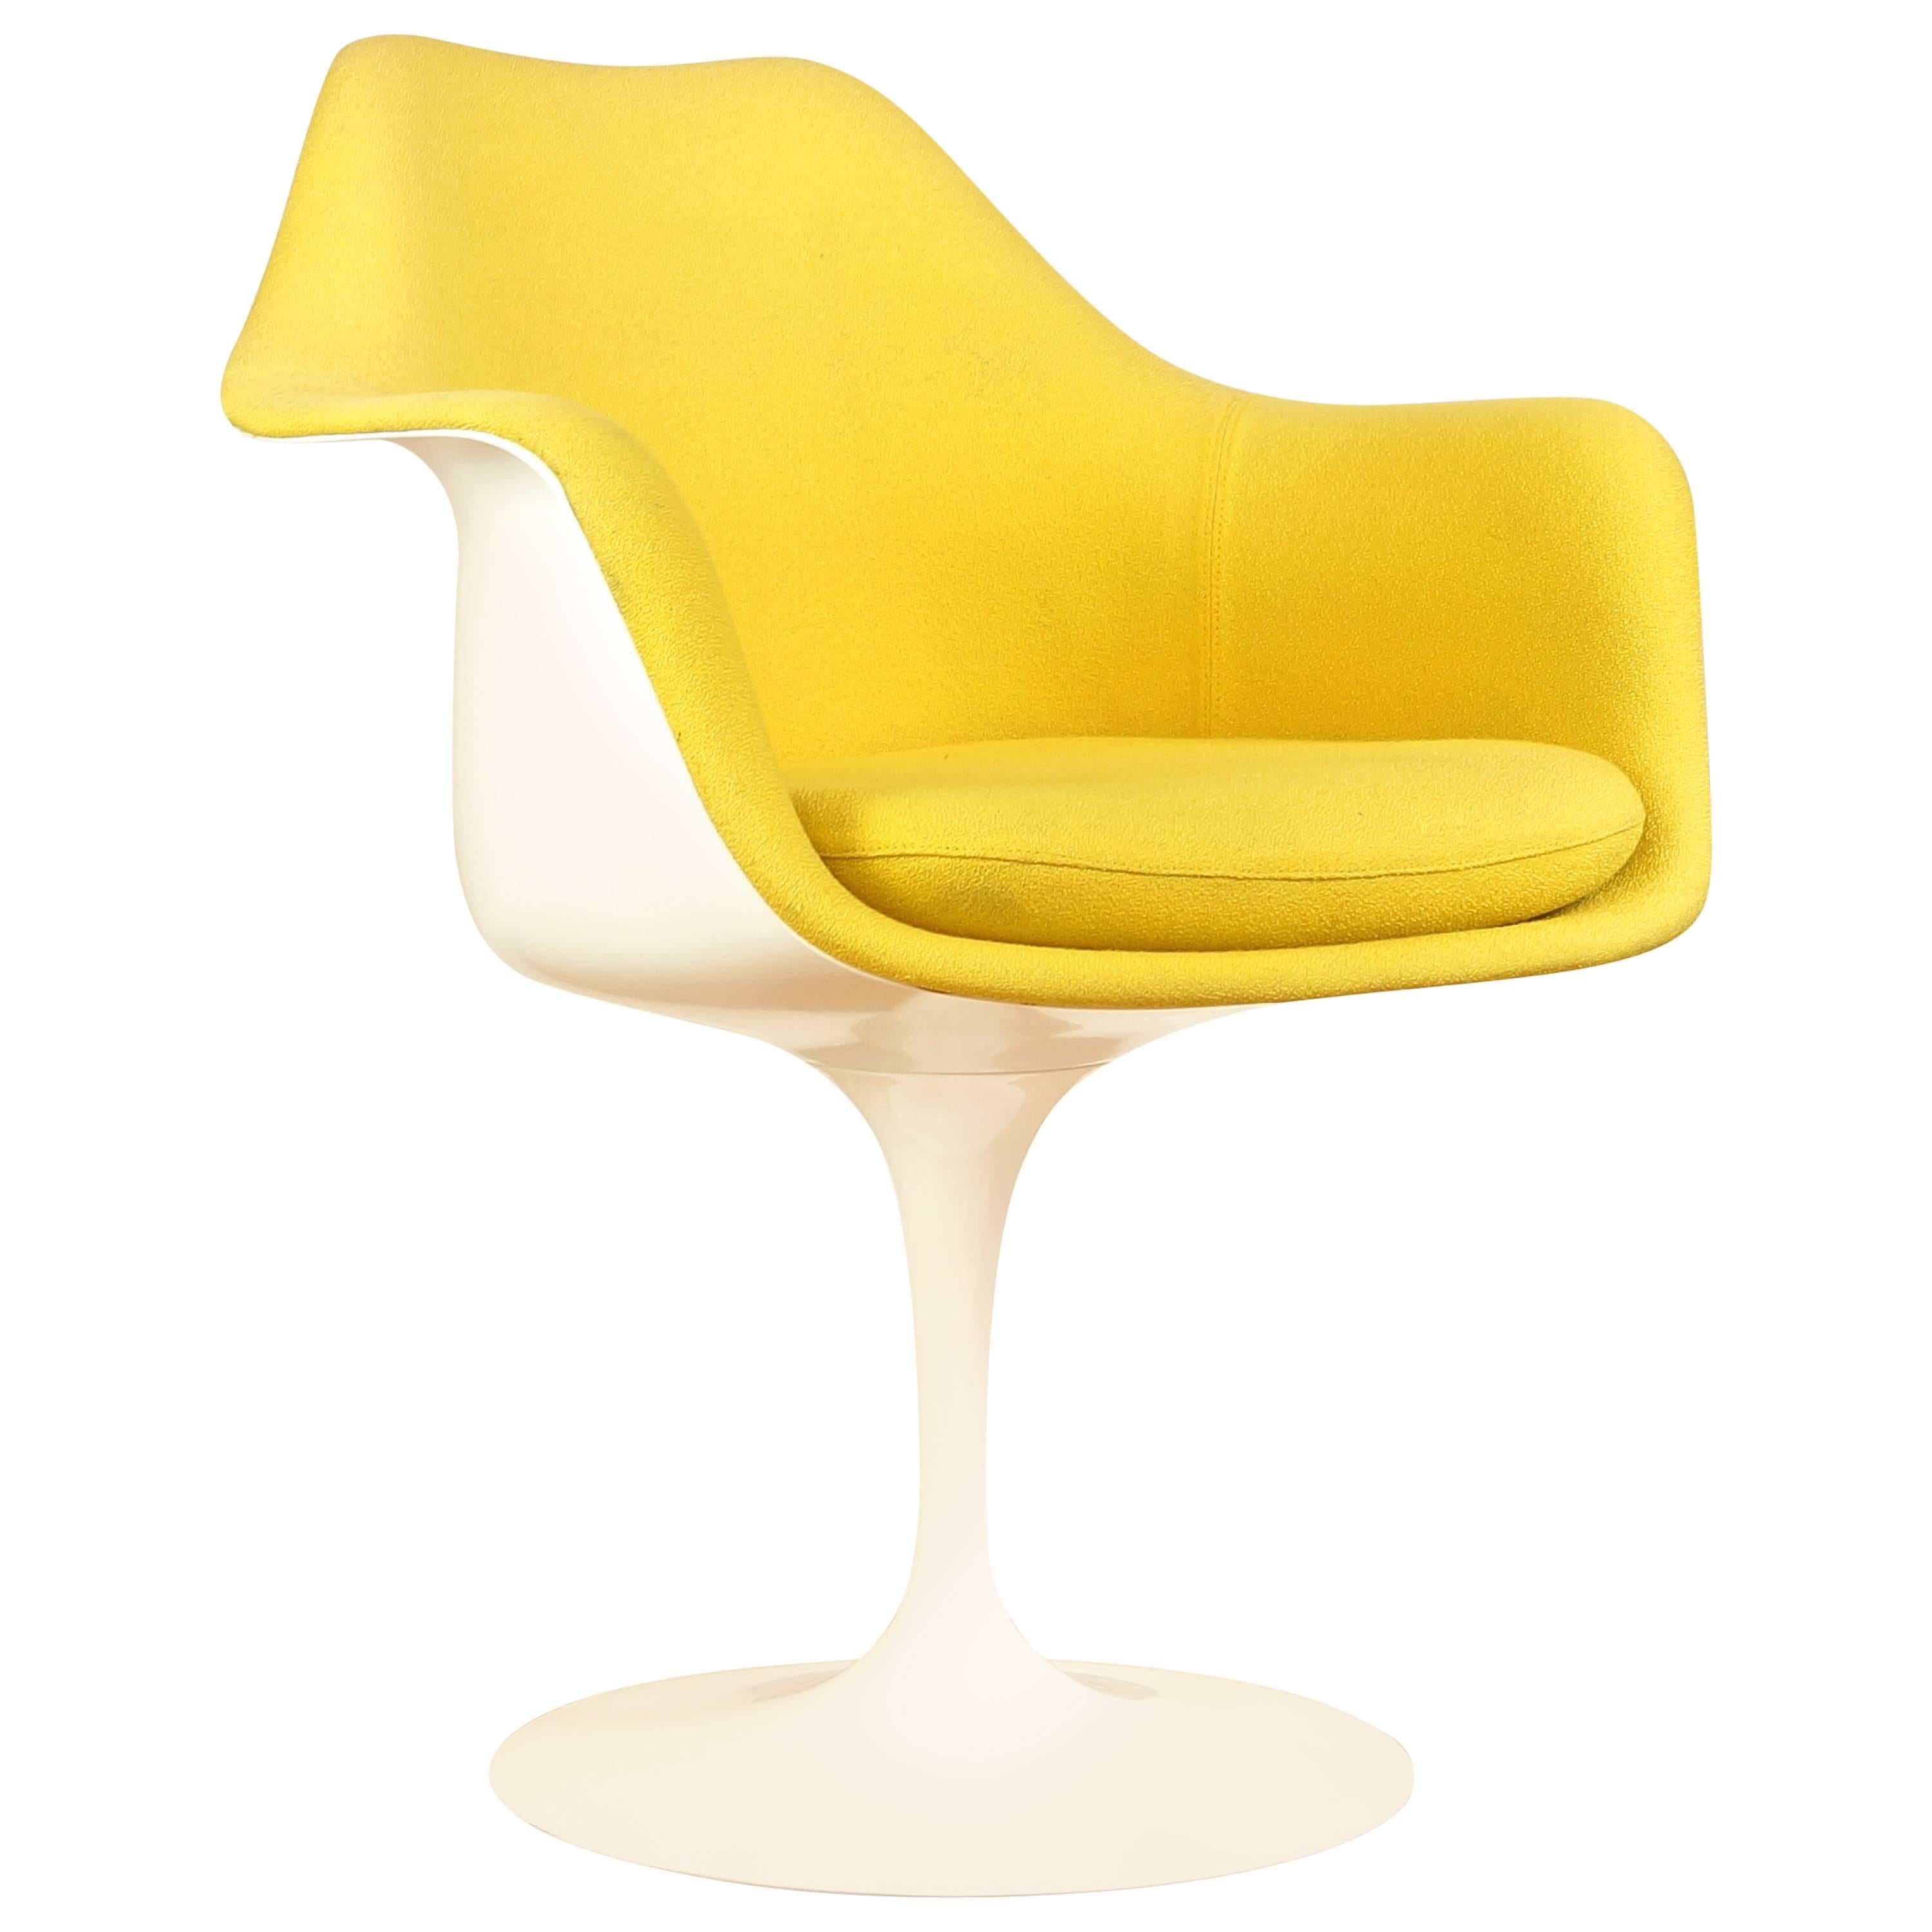 Vintage Tulip Chair or Armchair by Eero Saarinen for Knoll, Yellow Upholstery